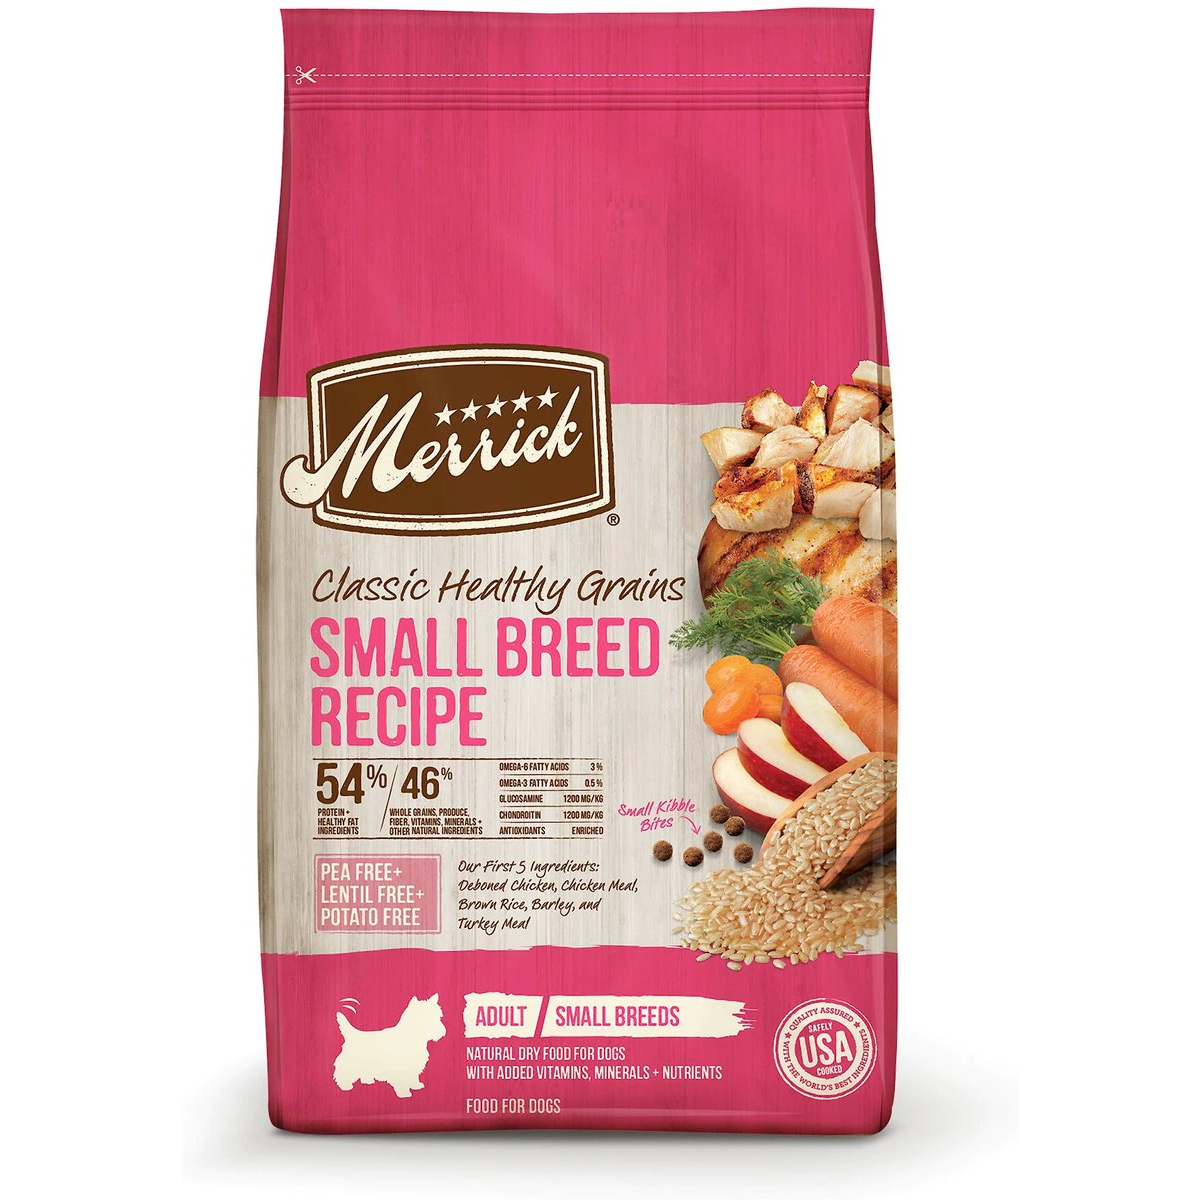 New Project Merrick Classic Healthy Grains Small Breed Recipe Adult Dry Dog Food 